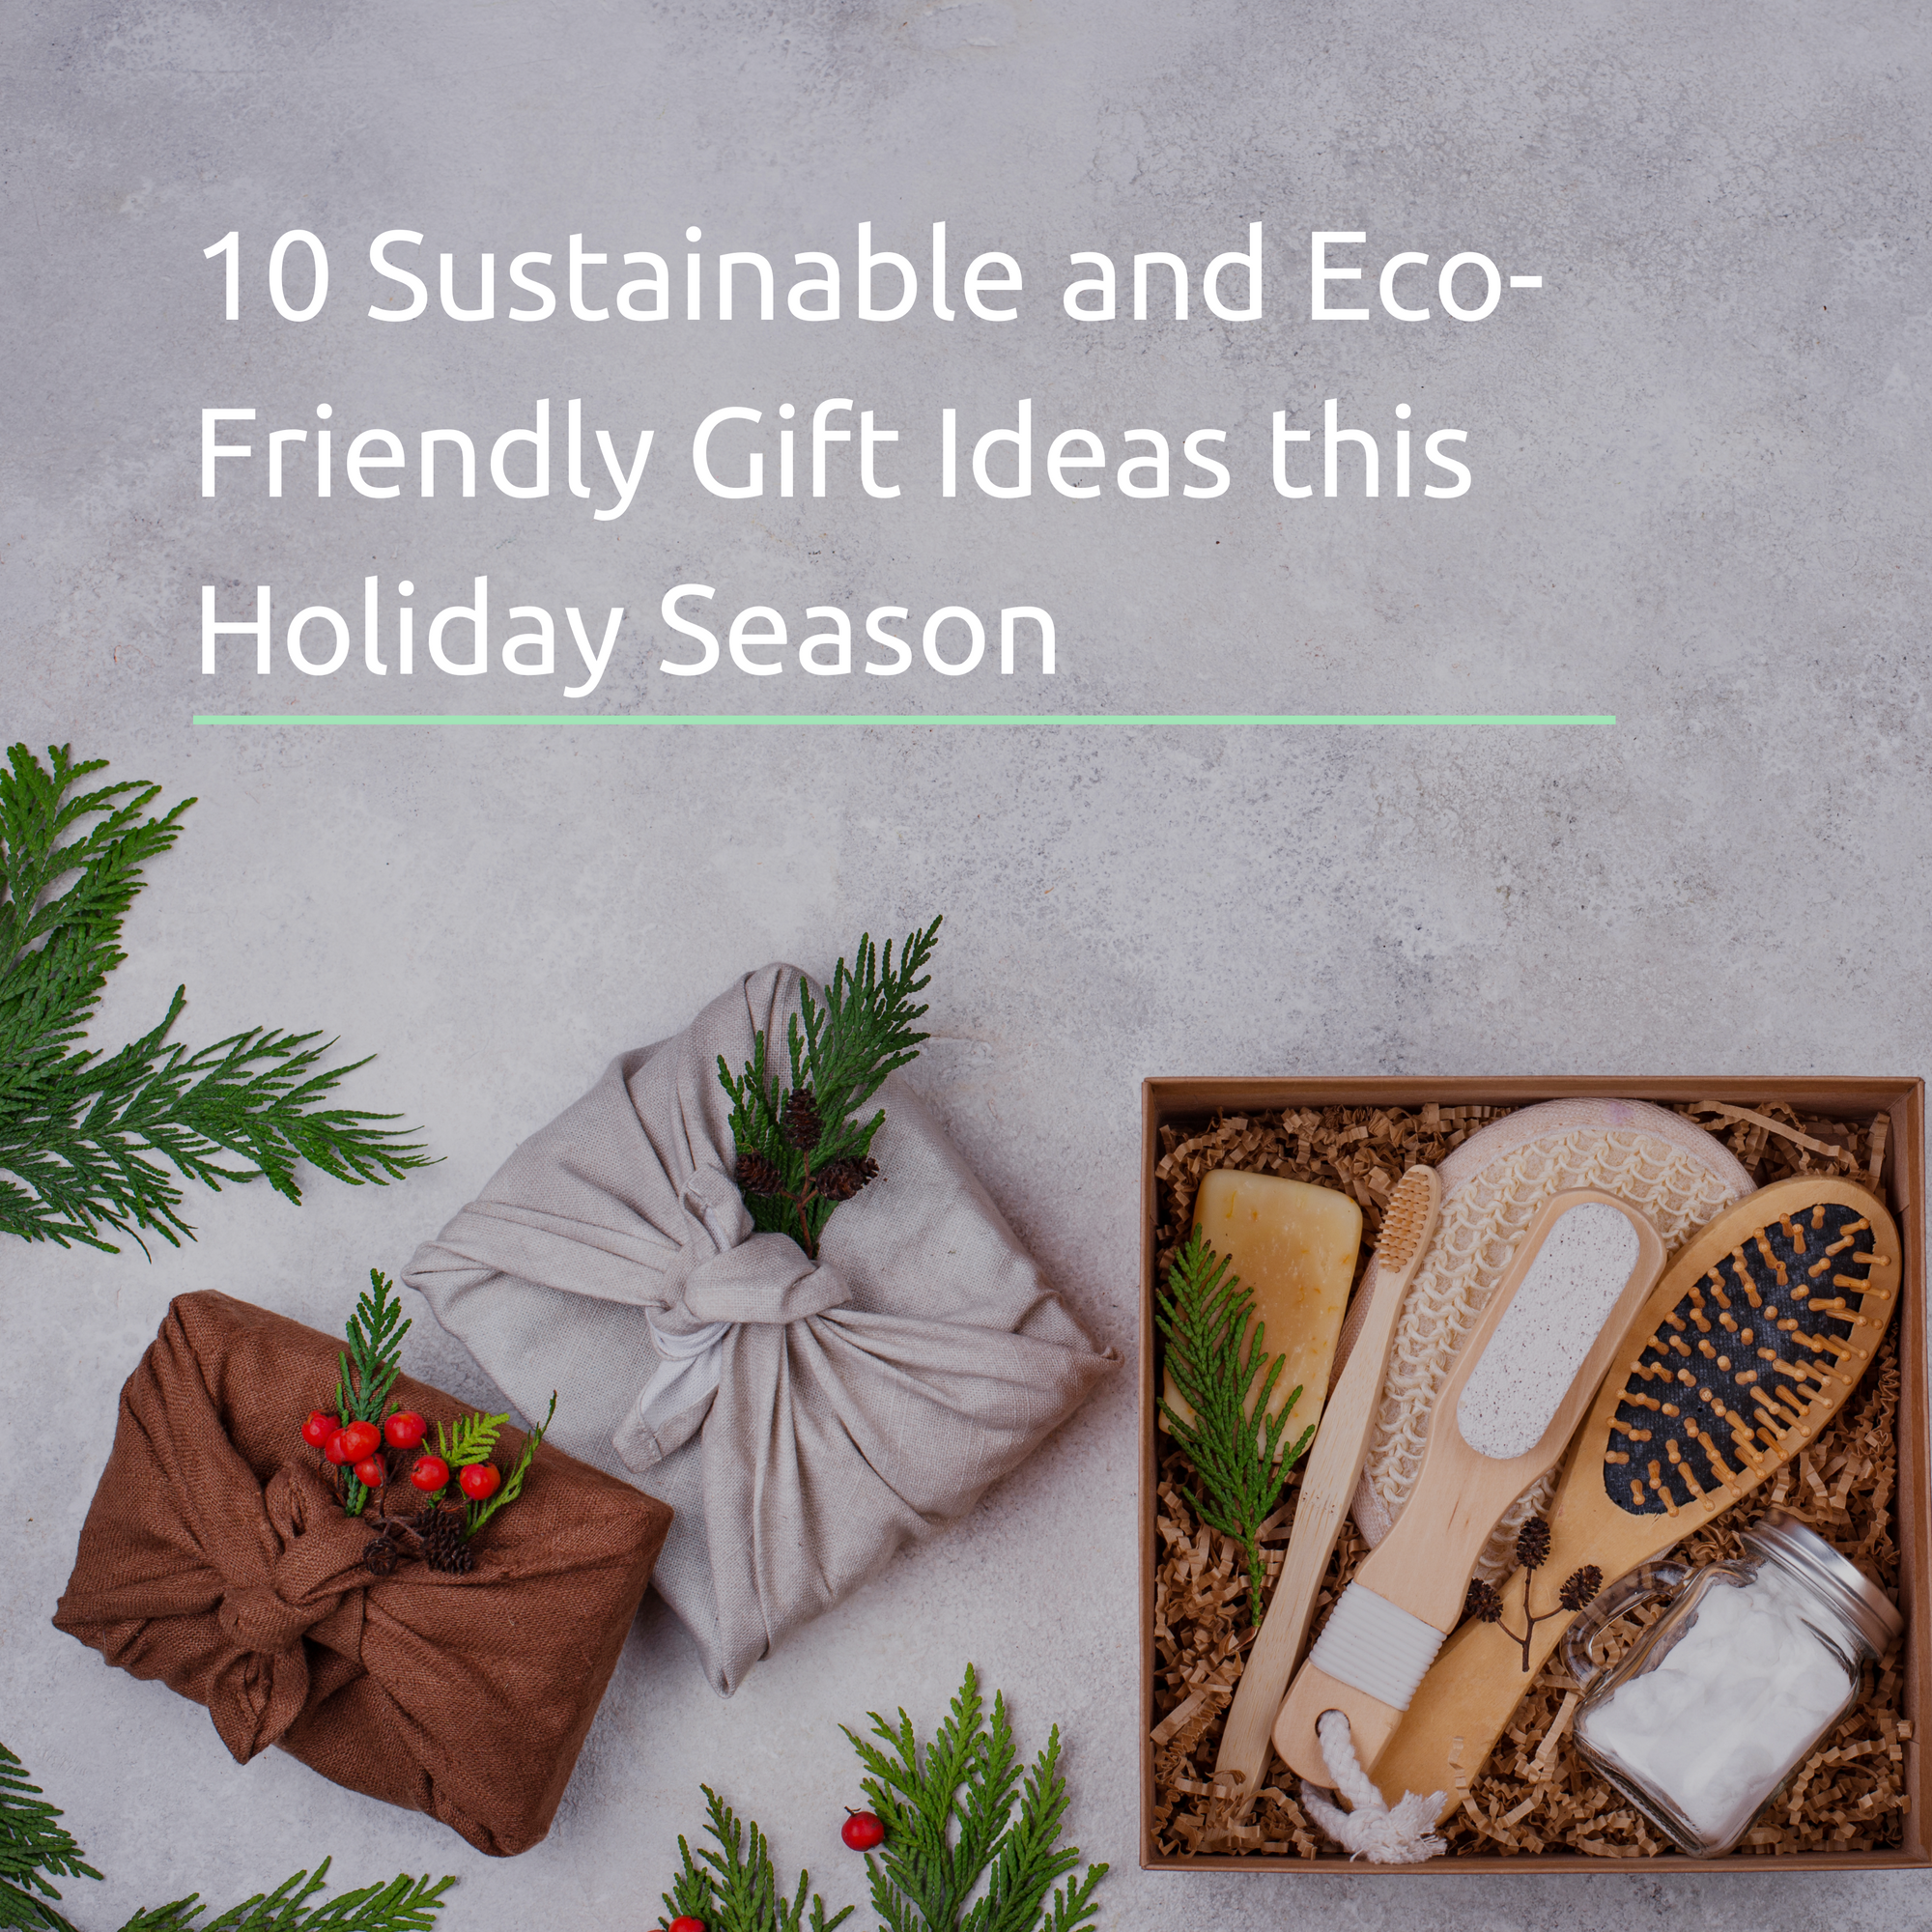 10 Sustainable and Eco-Friendly Gift Ideas this Holiday Season